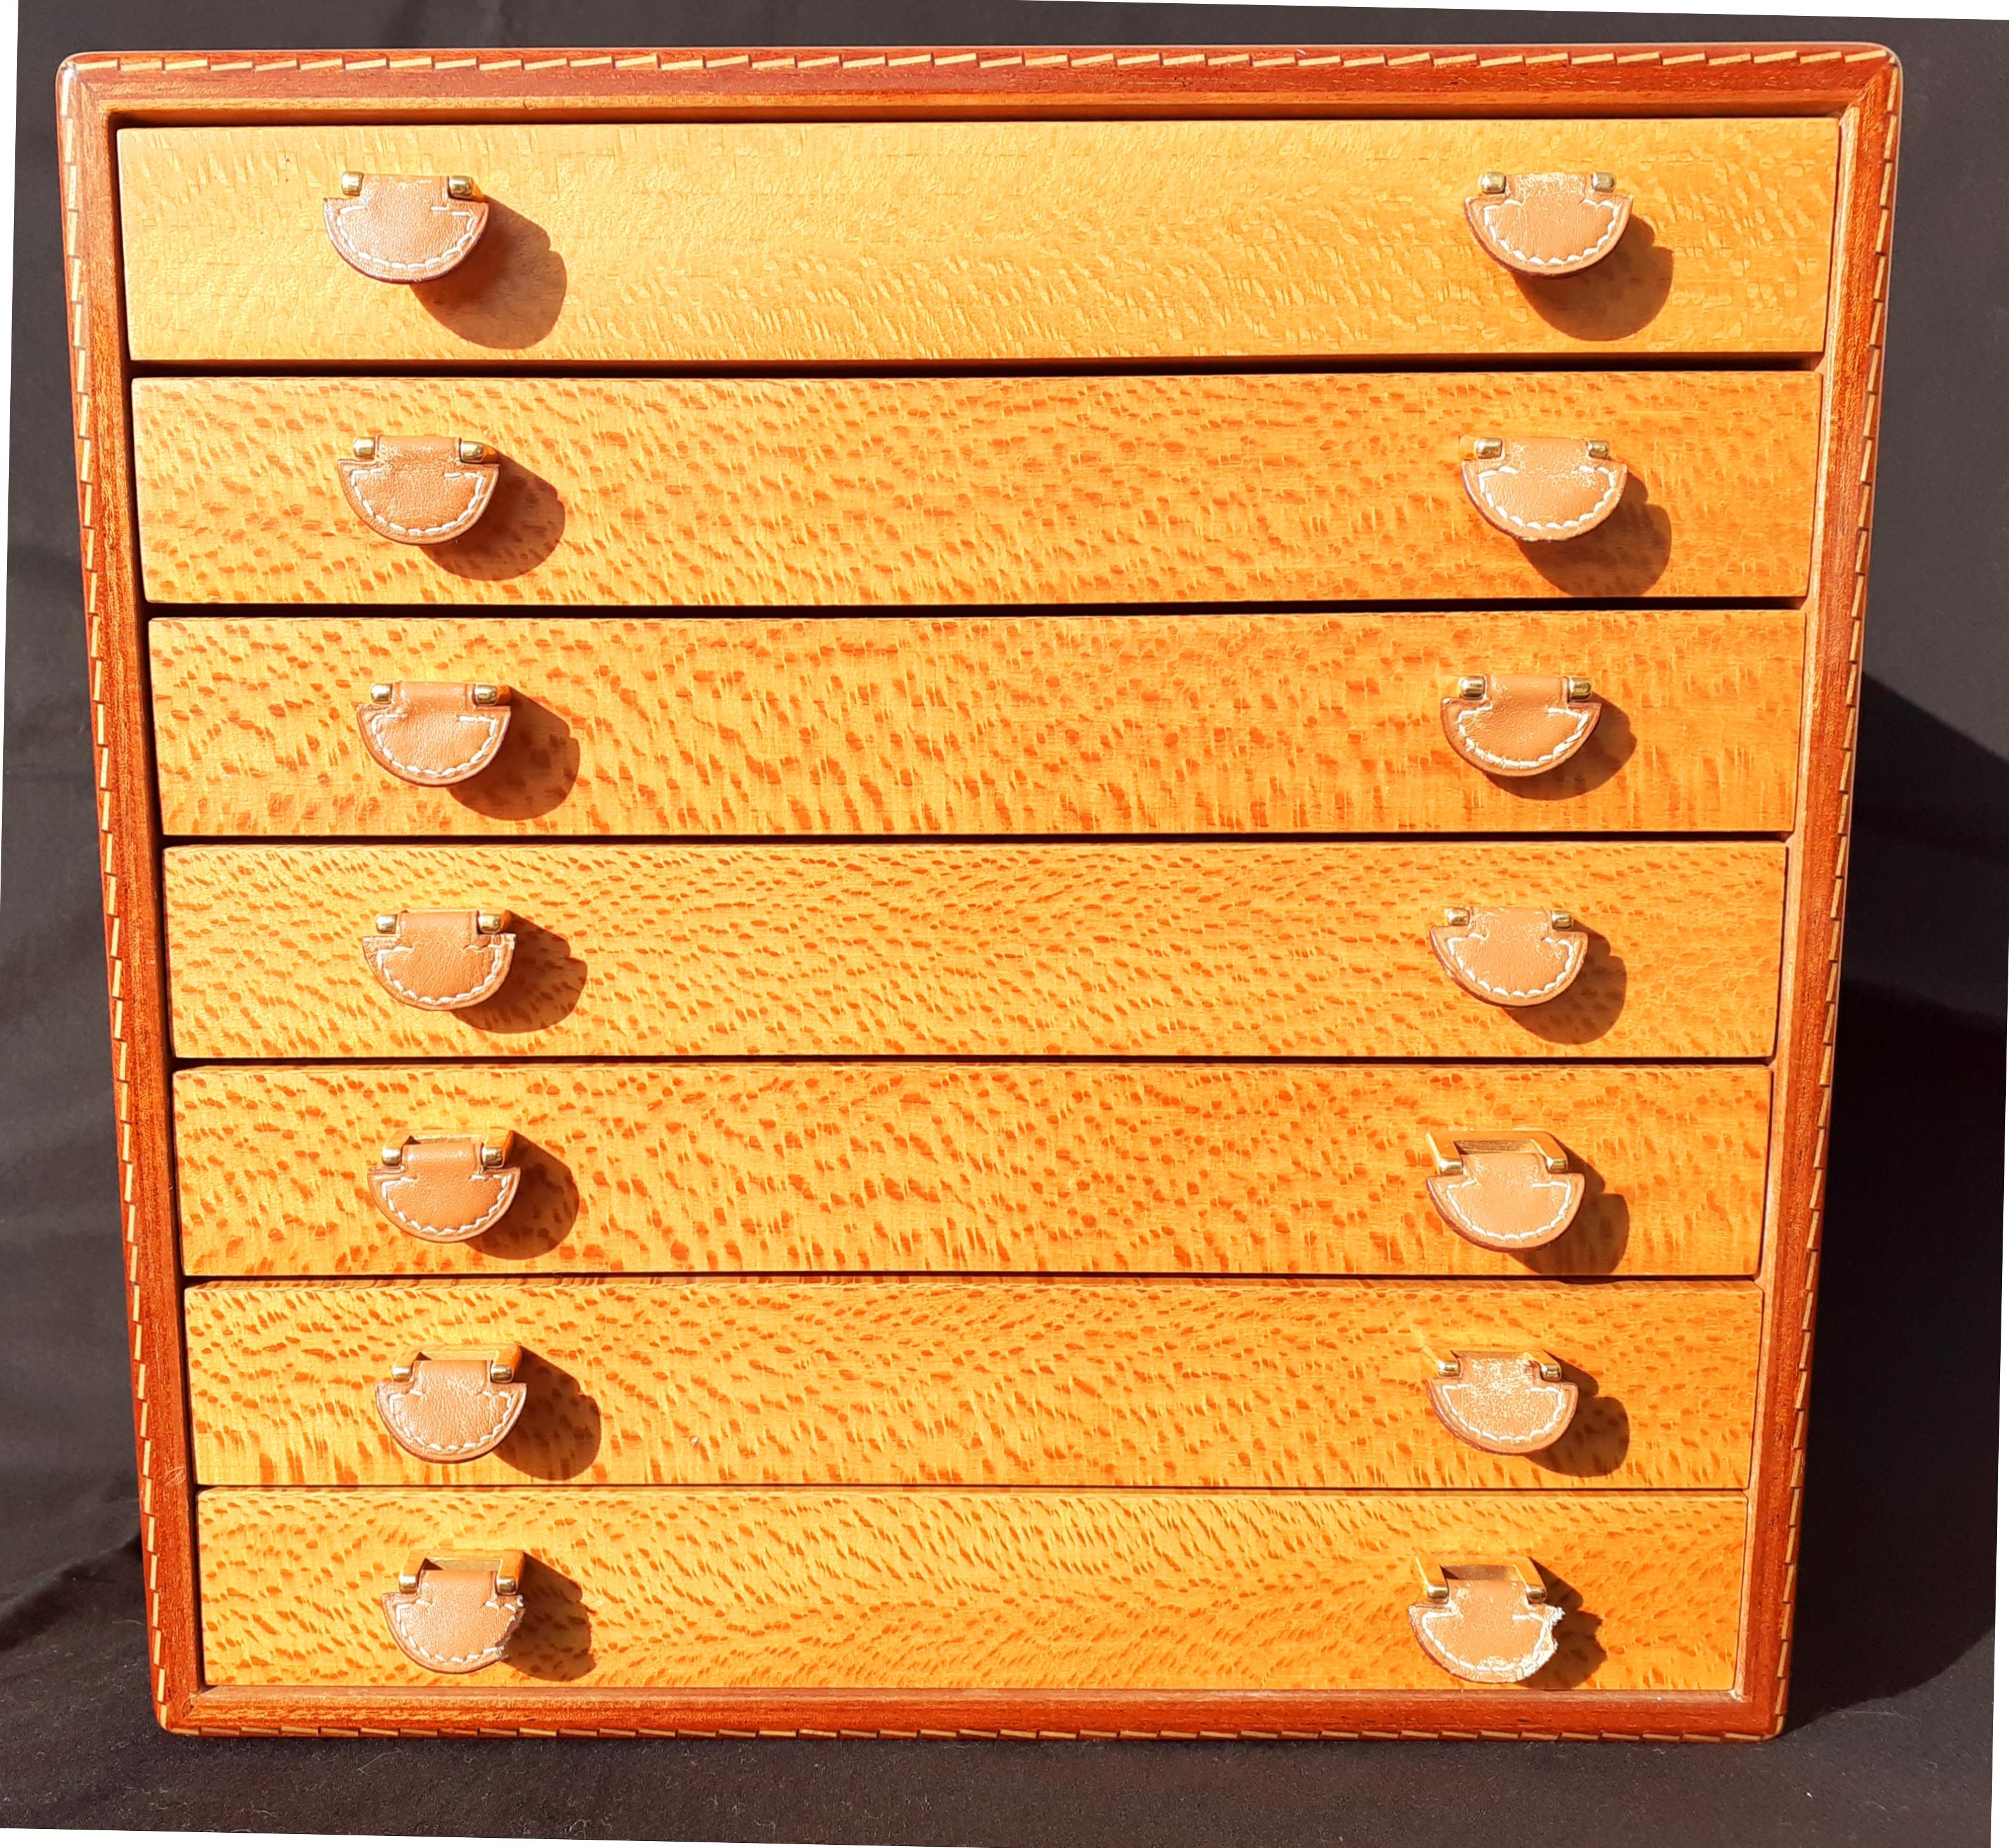 Rare and Gorgeous Authentic Hermès Chest

To store scarves, but can be used for jewelry as well

Made of wood leather handles

Coloway: Light Brown, brown, Beige/Gold Leather

Includes 7 drawers in wood

